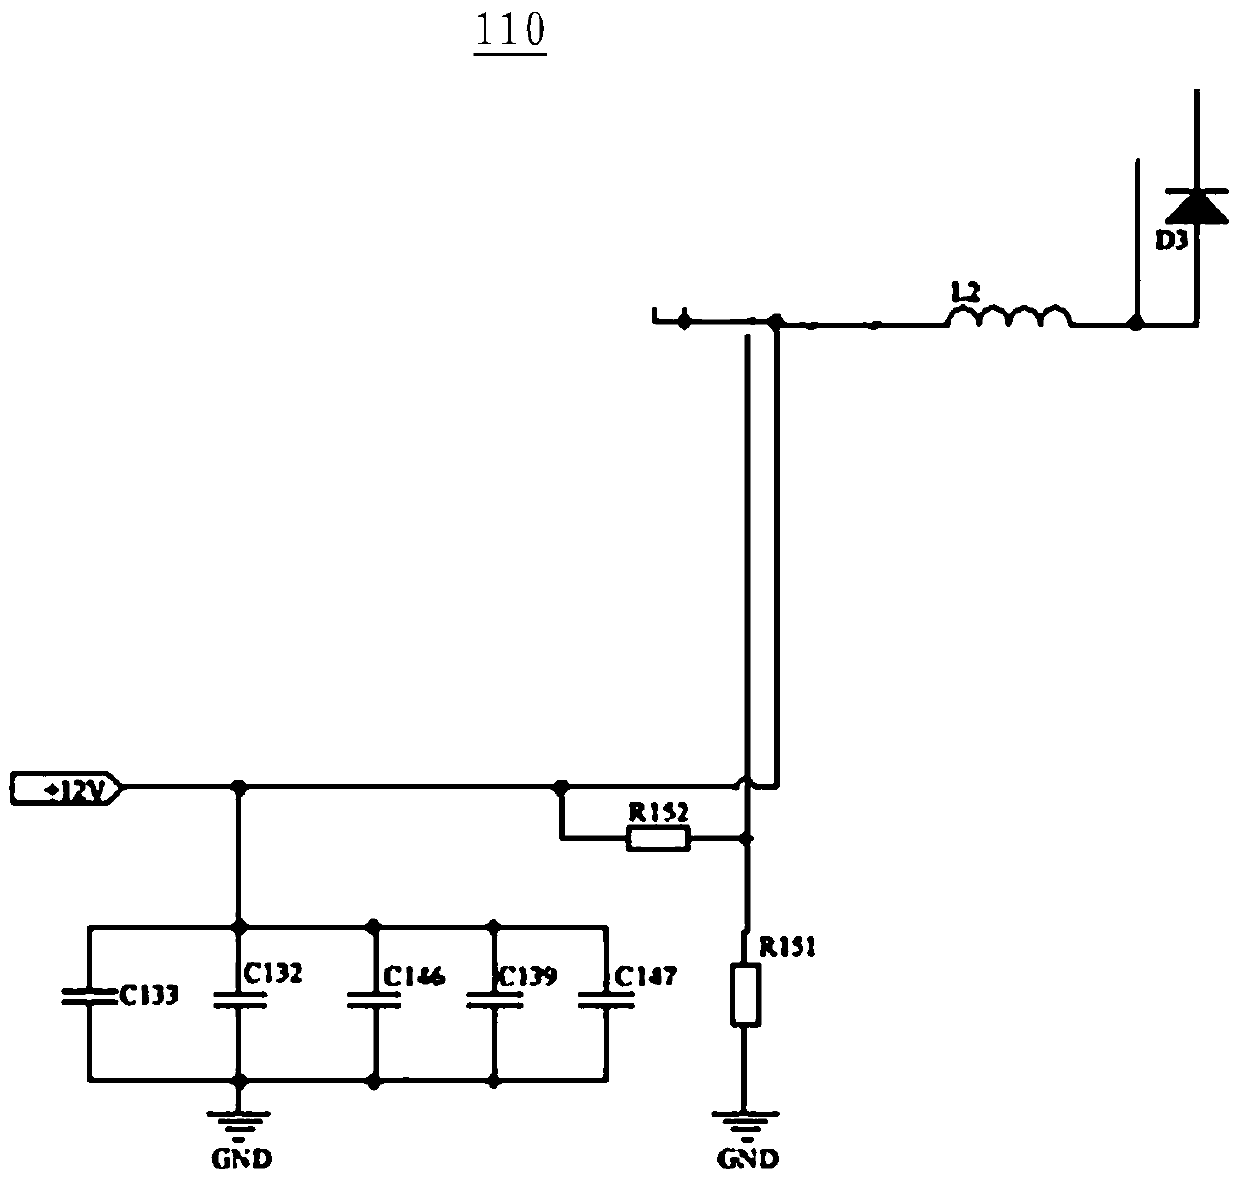 TCON drive circuit applied to notebook computer